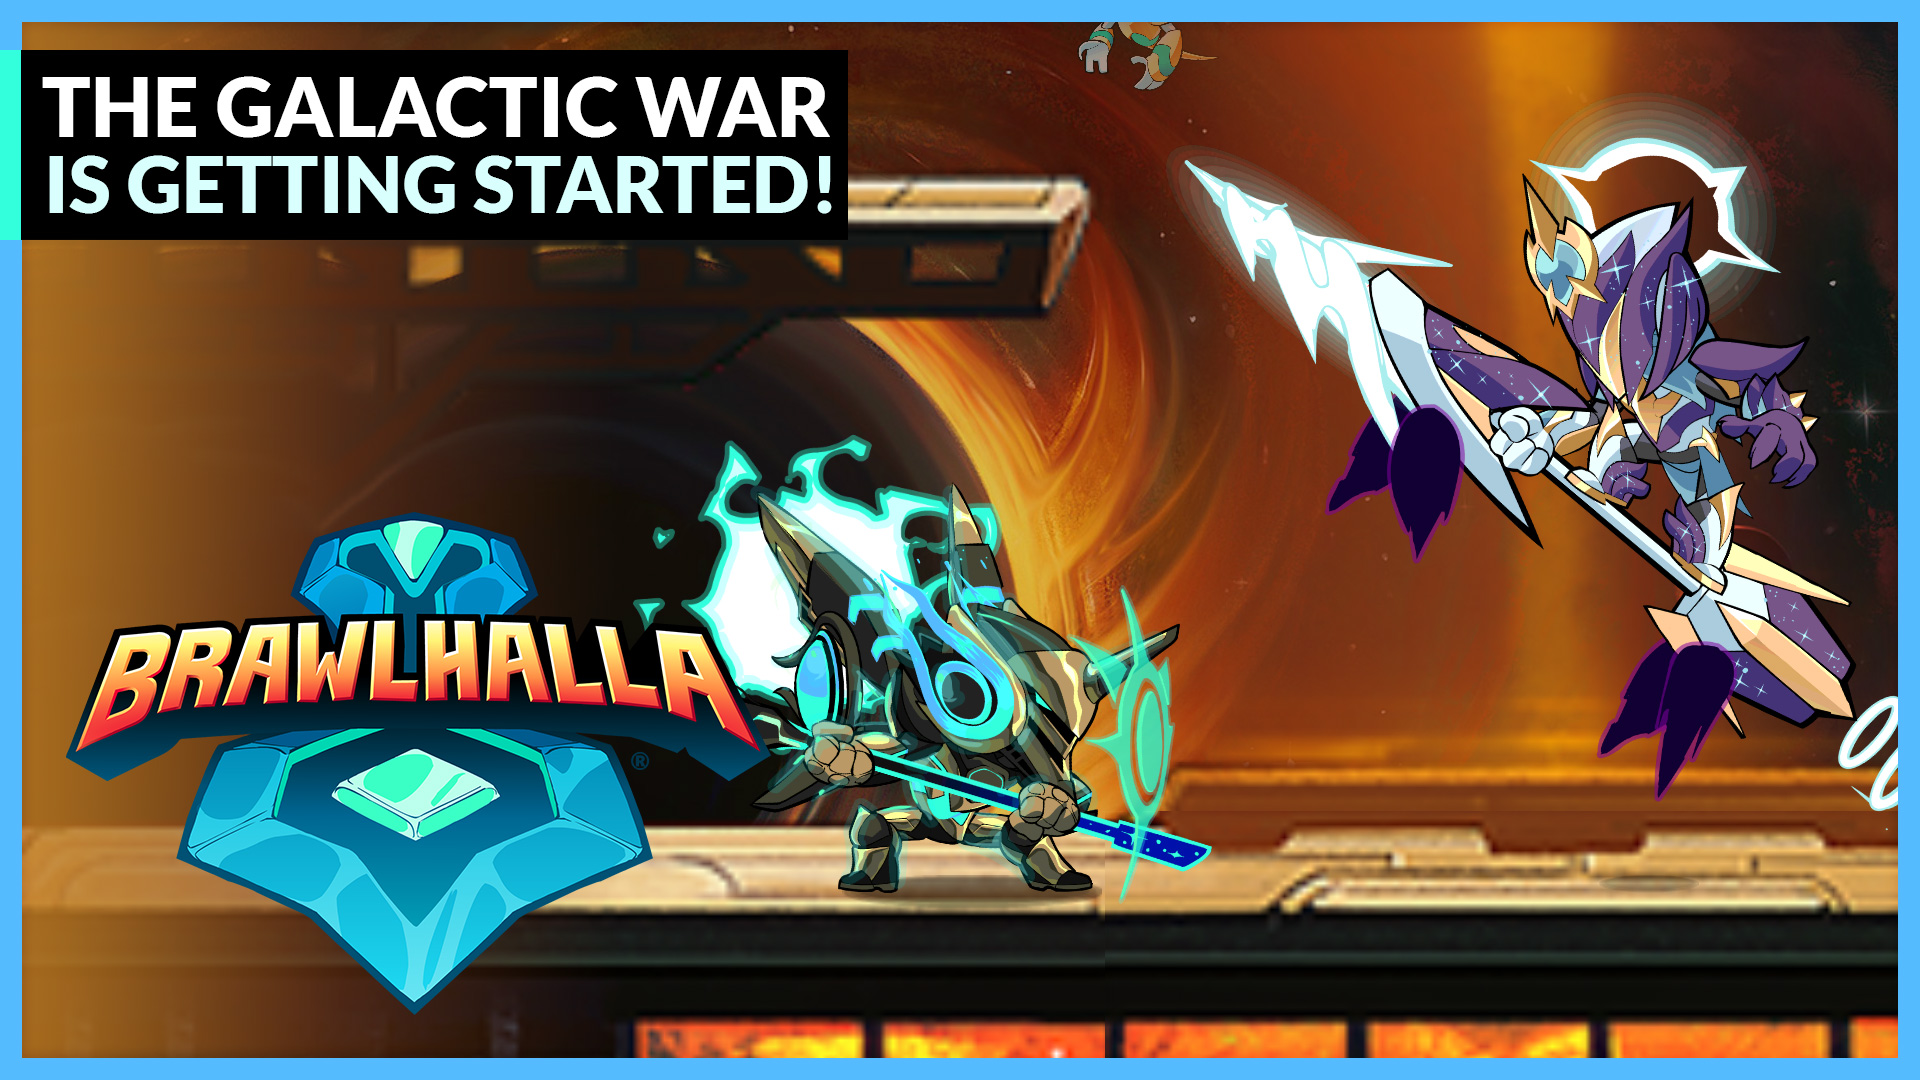 The Galactic War is Just Getting Started!